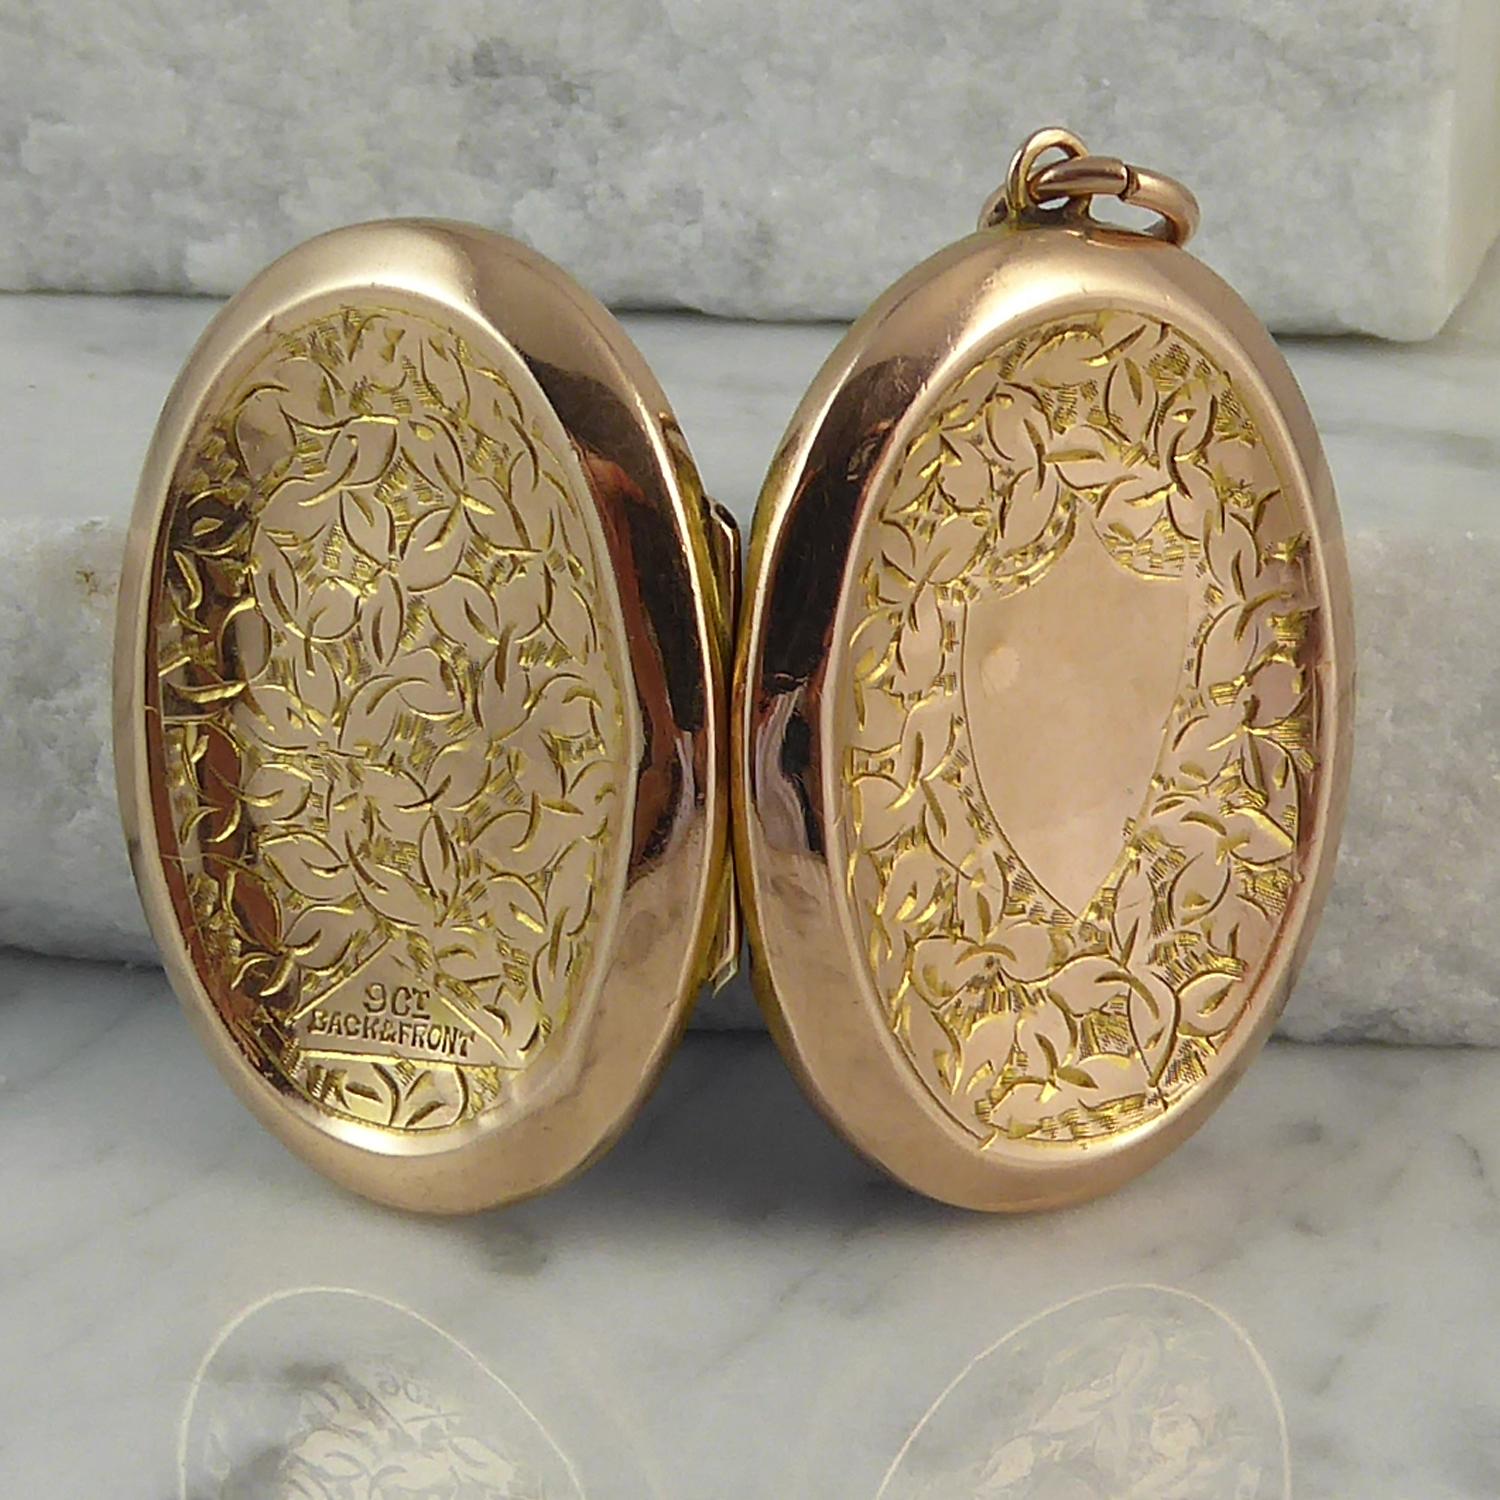 Women's or Men's Antique Engraved Locket, Gold Back and Front, circa 1900, Late Victorian